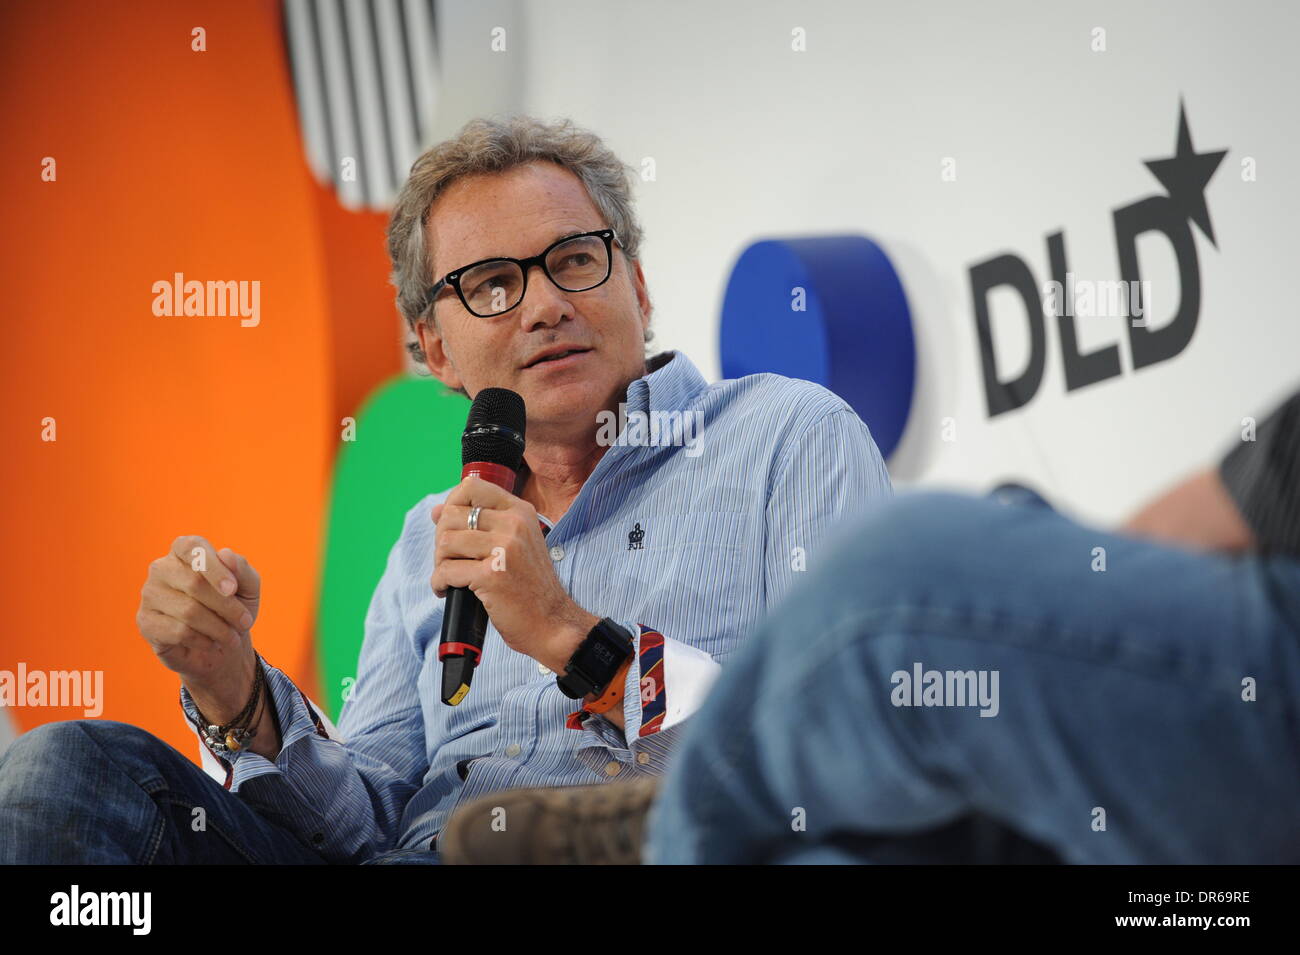 MUNICH/GERMANY - JANUARY 20: Martin Varsavsky (Fon) speaks on the podium during the Digital Life Design (DLD) Conference at the HVB Forum on January 20, 2014 in Munich, Germany. DLD is a global network on innovation, digitization, science and culture which connects business, creative and social leaders, opinion-formers and influencers for crossover conversation and inspiration. (Photo: picture alliance / Jan Haas) Stock Photo